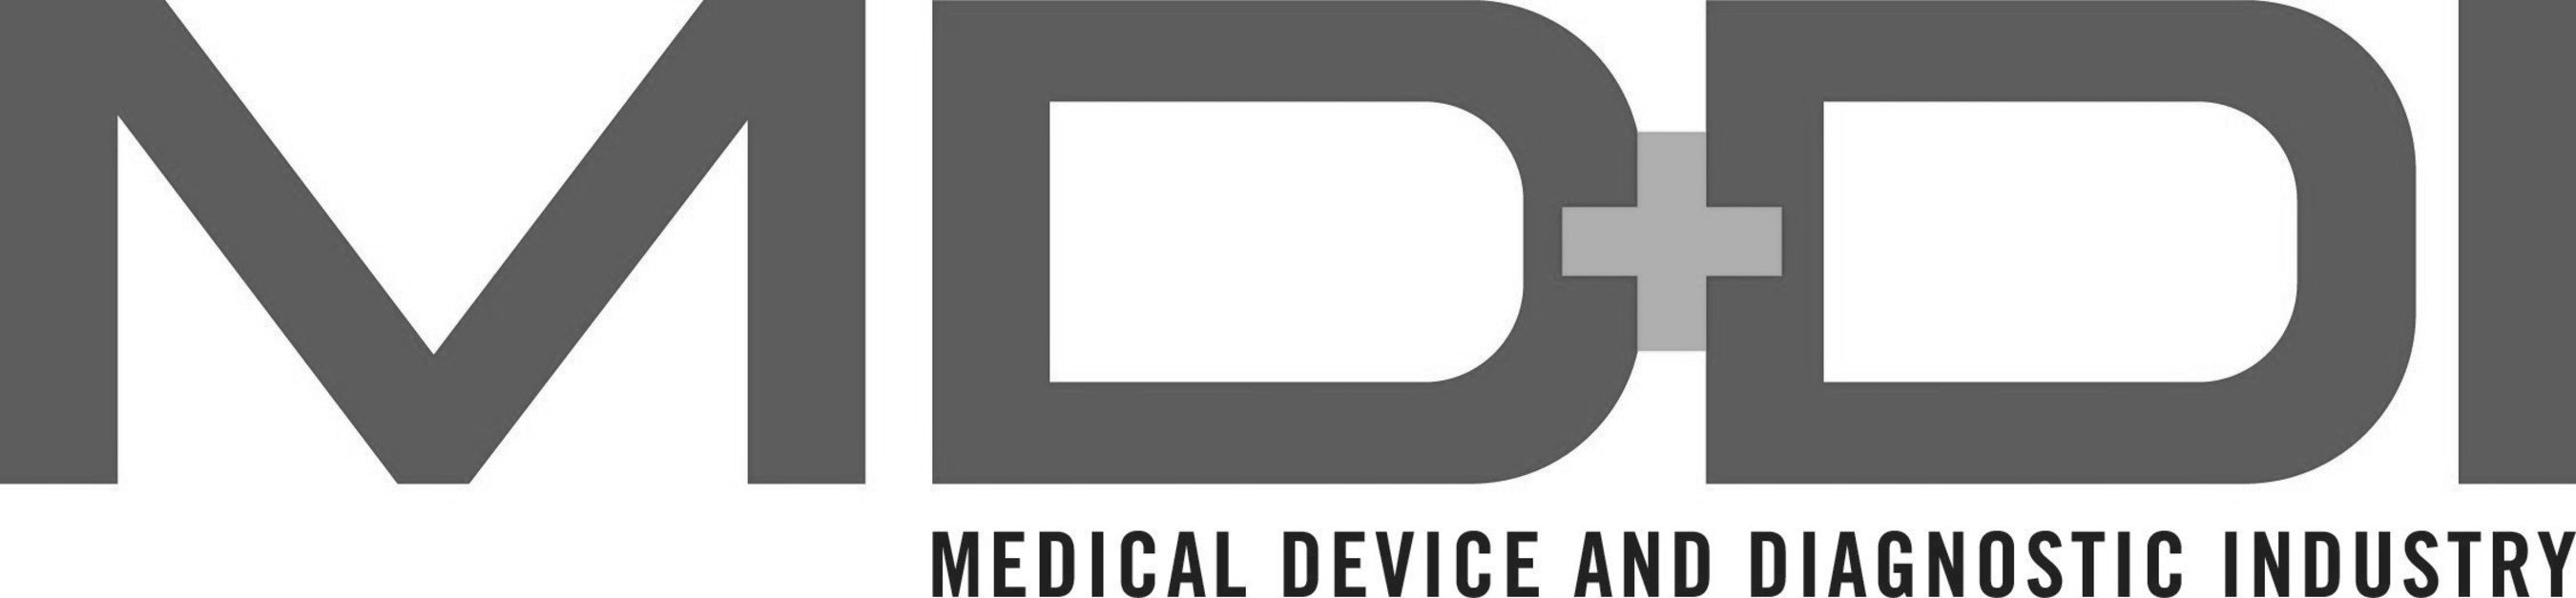 medical device and diagnostic industry logo 